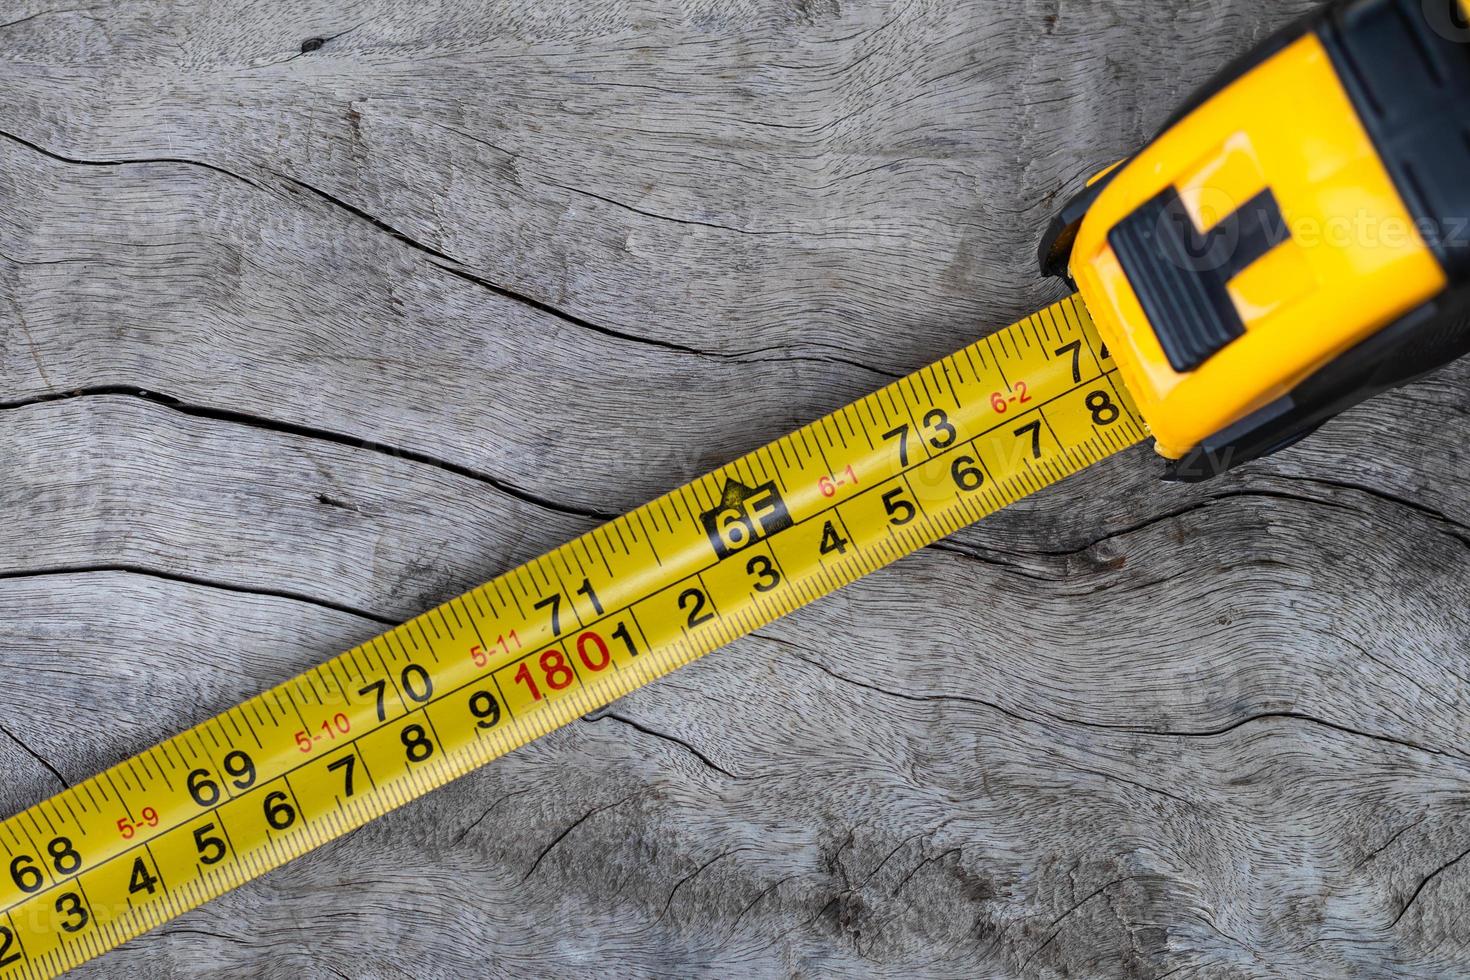 The 6-foot measuring tape put on the old wooden floor. photo